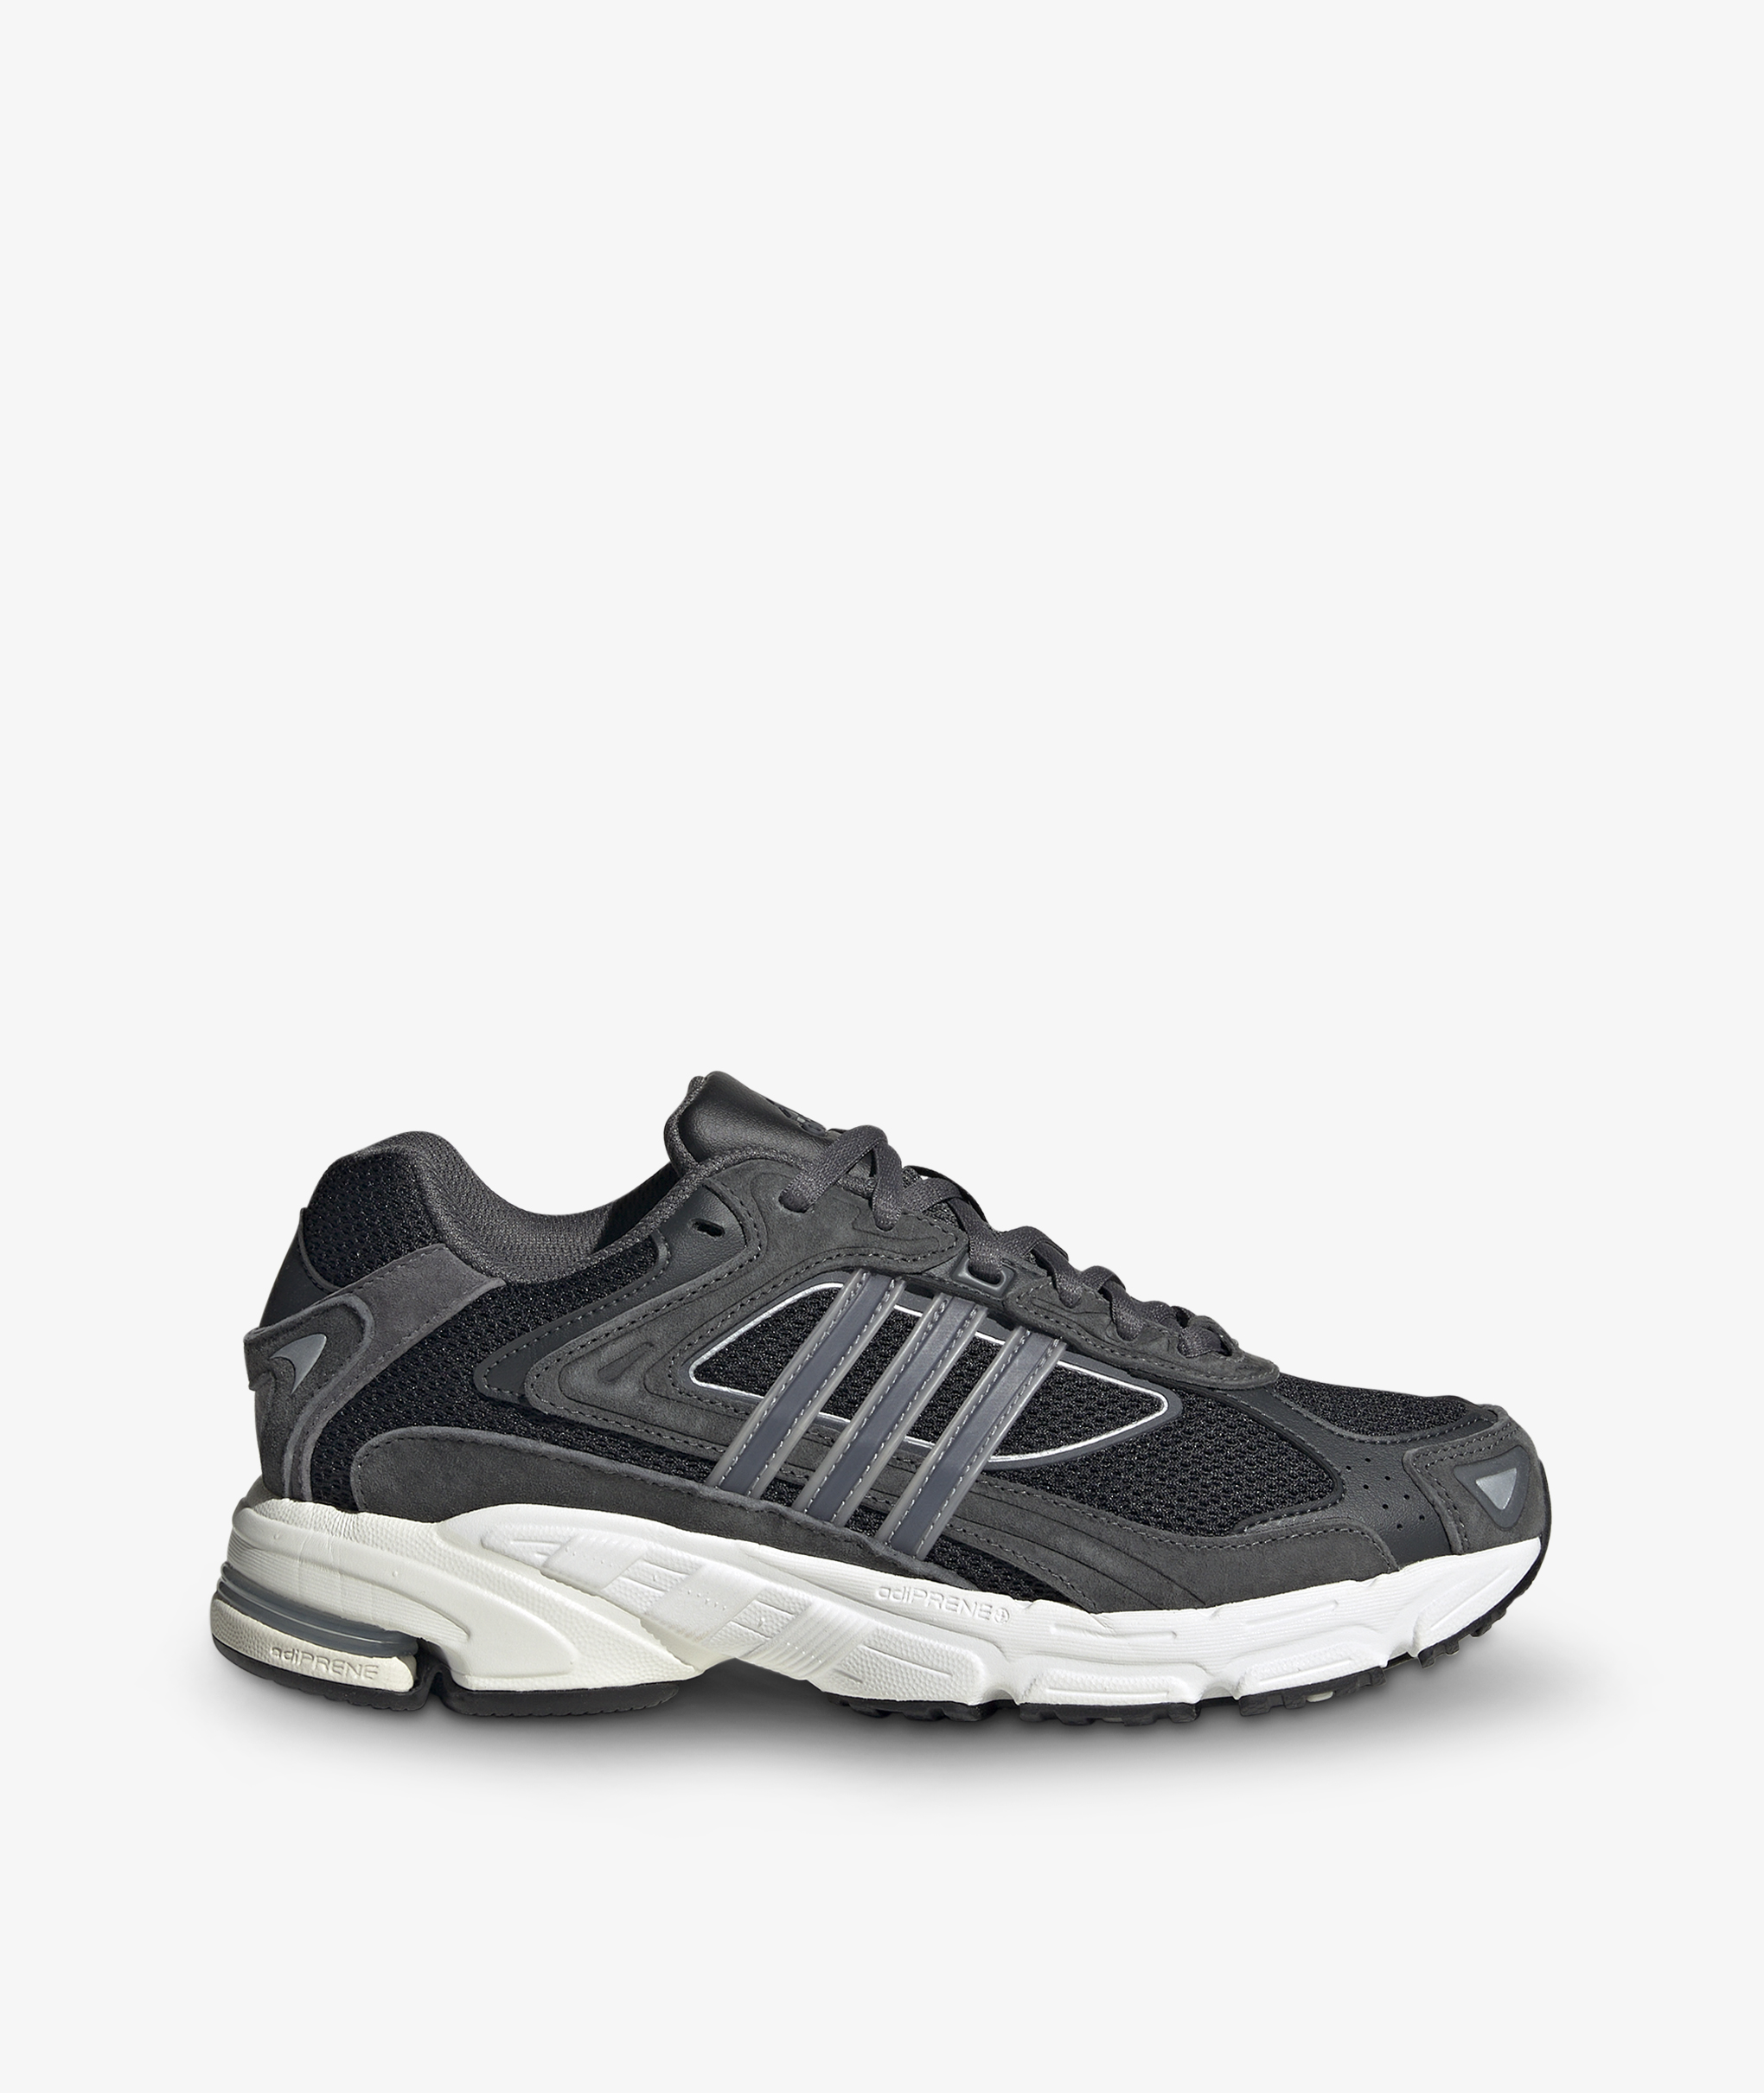 Norse Store Shipping Worldwide - adidas RESPONSE CL -